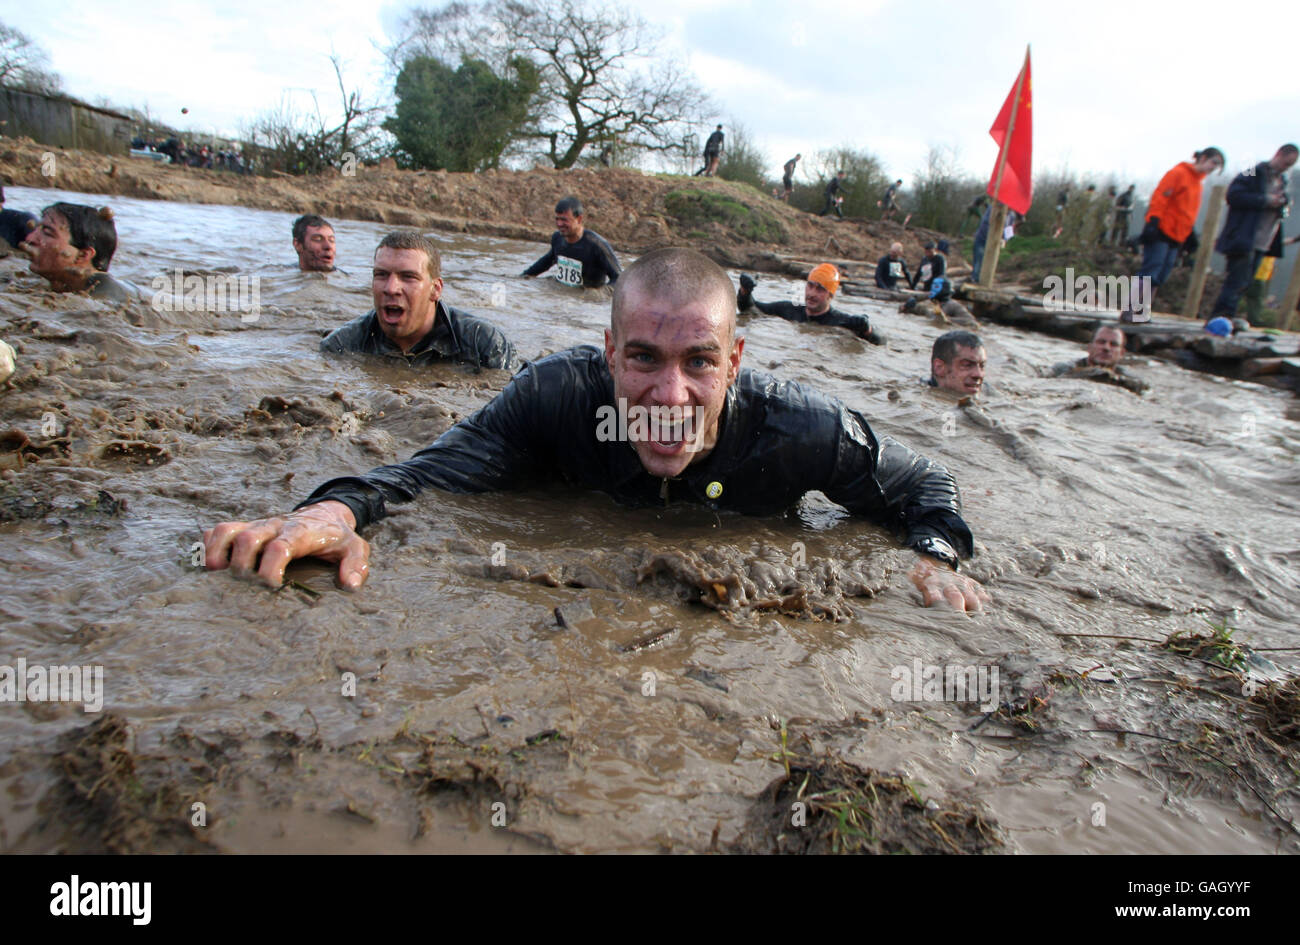 Tough Guy 2008 - Perton, Wolverhampton. Comtetitors emerge from the water during one of the obstacles in the Tough Guy 2008 race Stock Photo